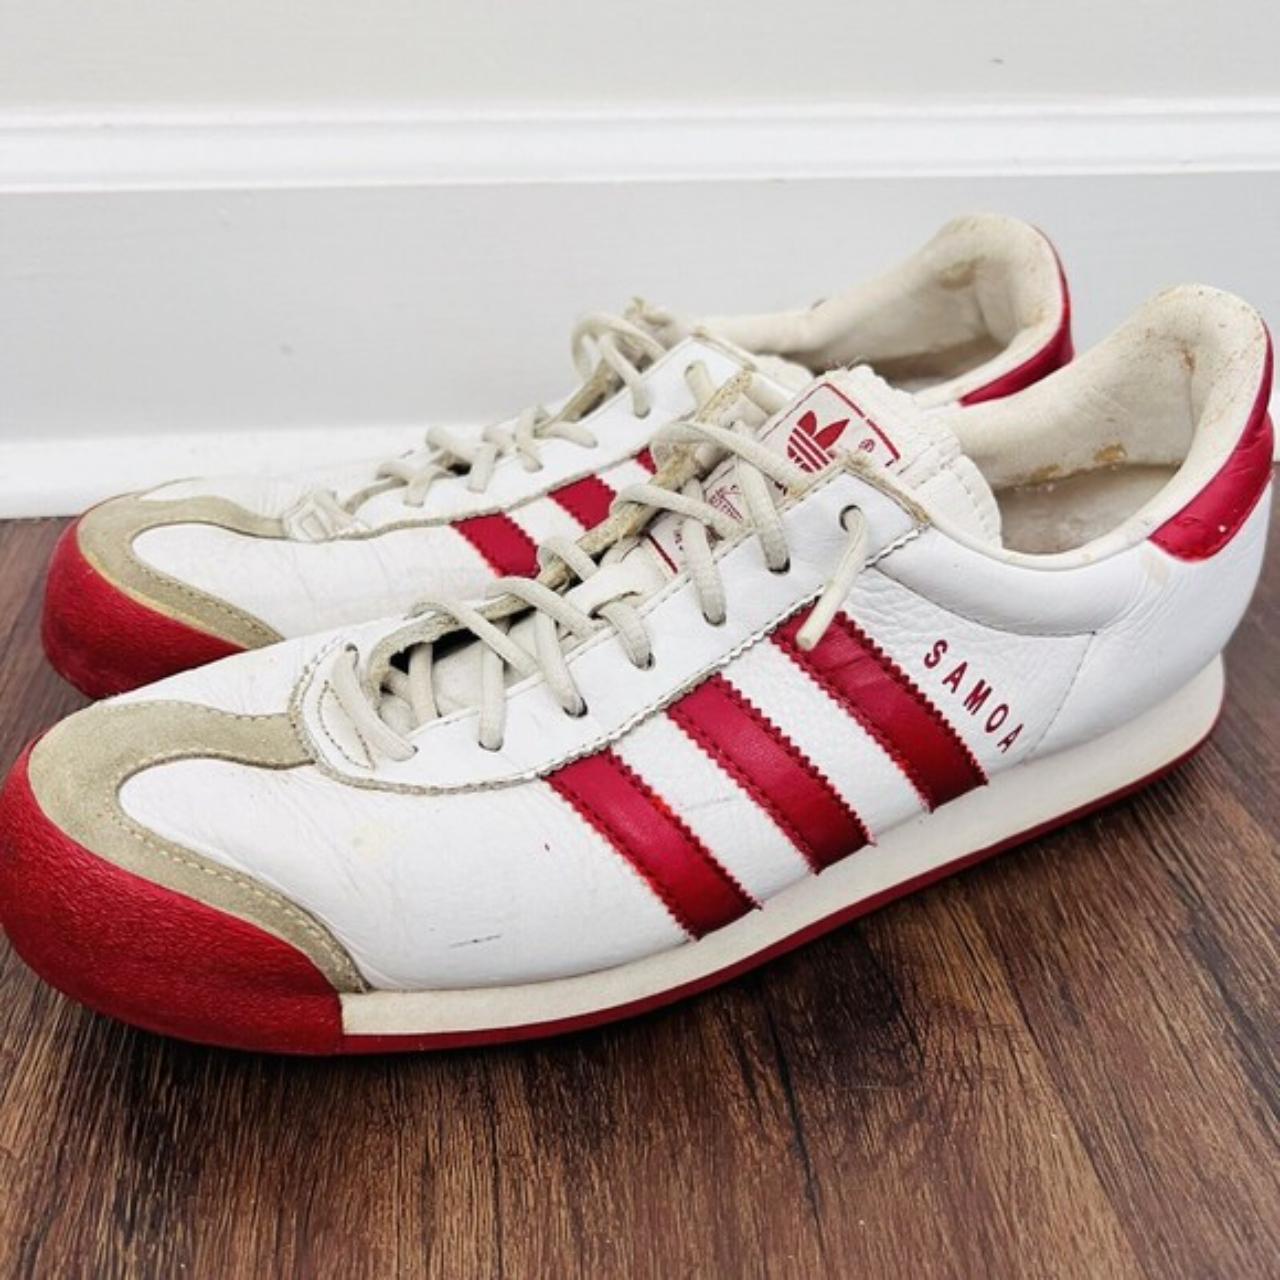 Adidas Men's Red and White Trainers | Depop